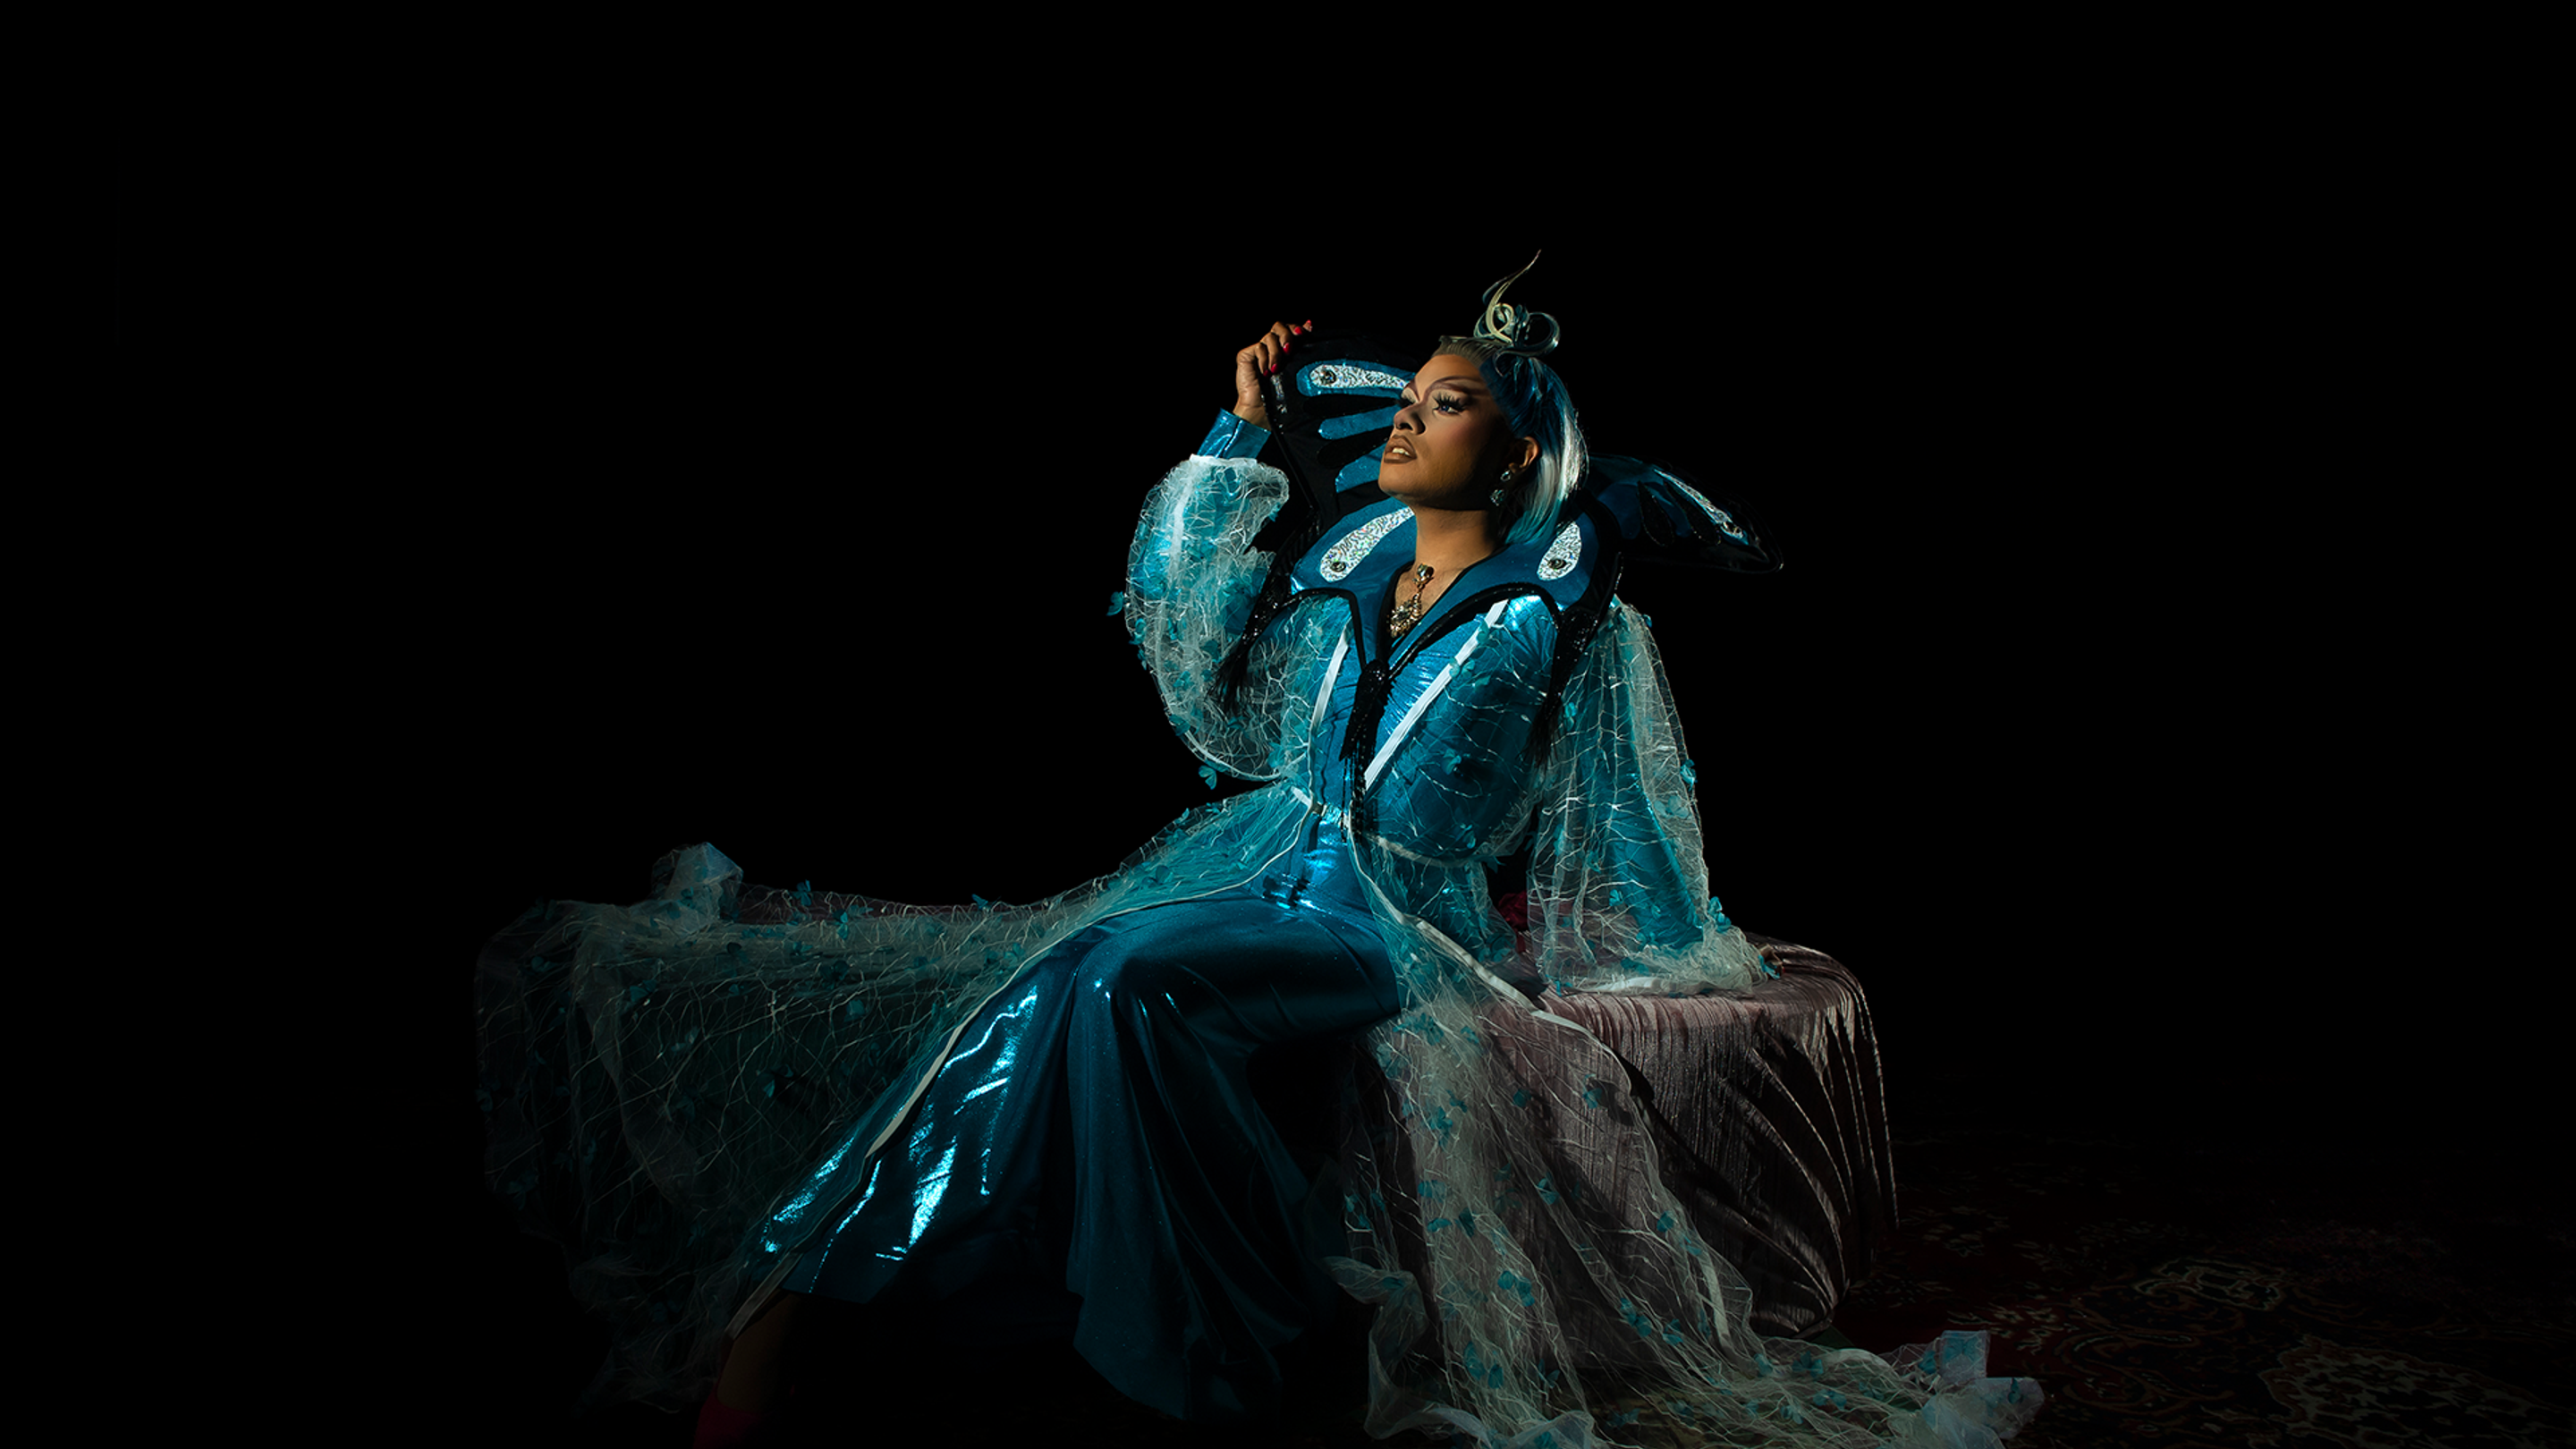 Cerulean, a First Nations drag queen in flowing royal dress leans back in their seat, looking up toward the top left of the frame